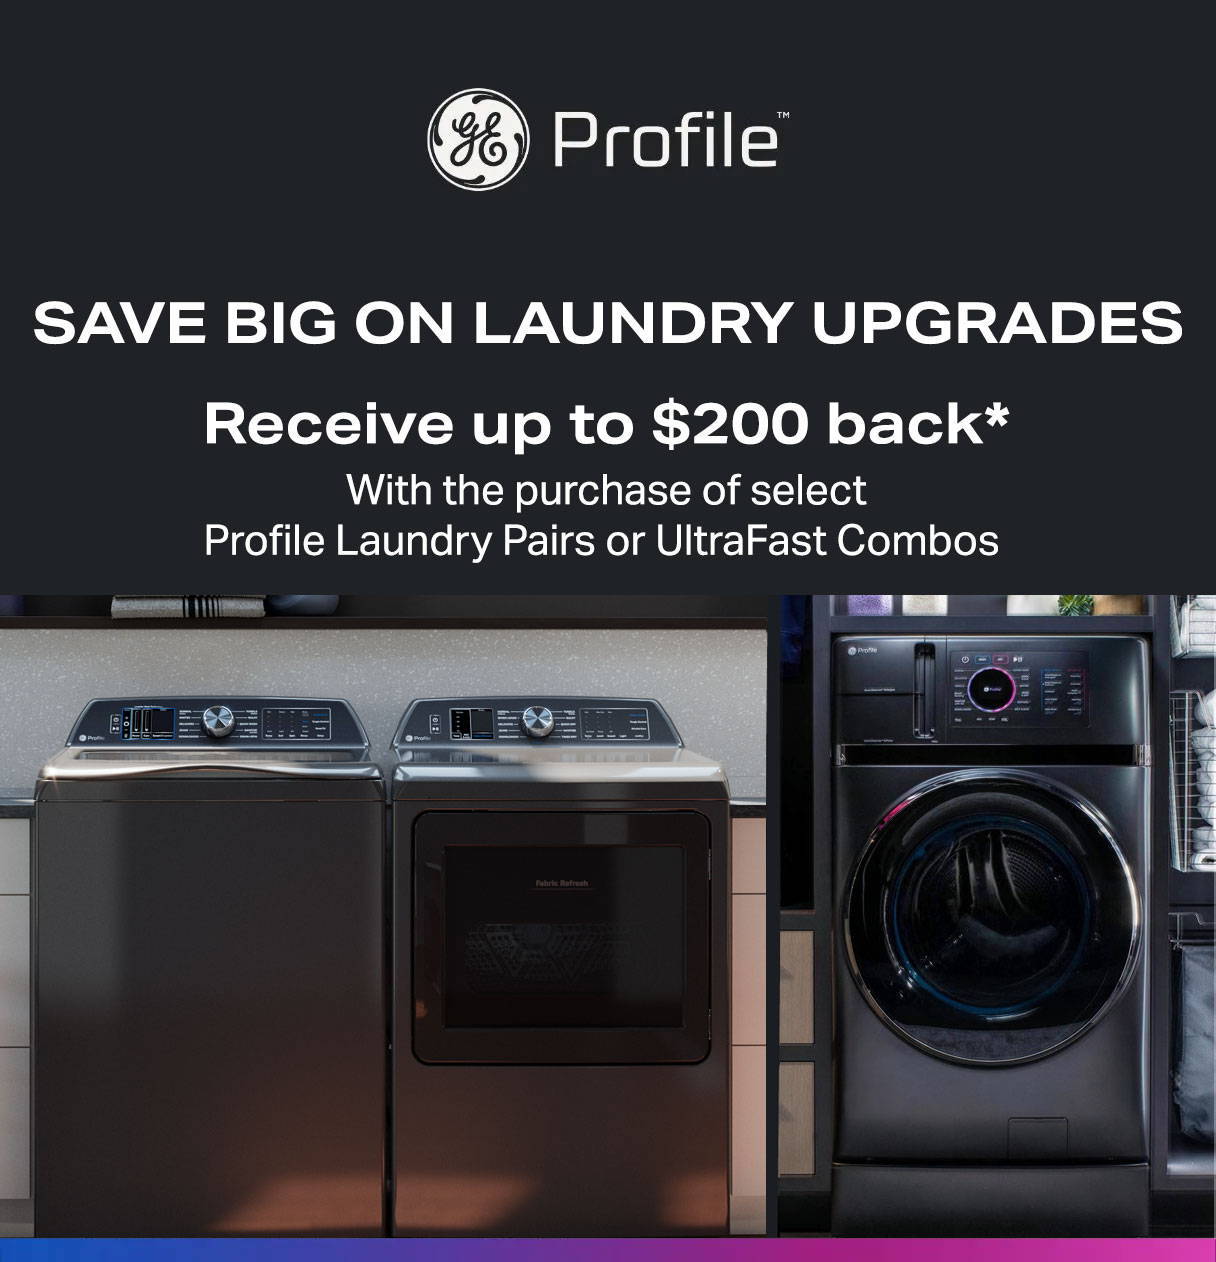 Gateway to Profile rebates - up to $2000 on select GE and GE Profile Appliance and Laundry packages.